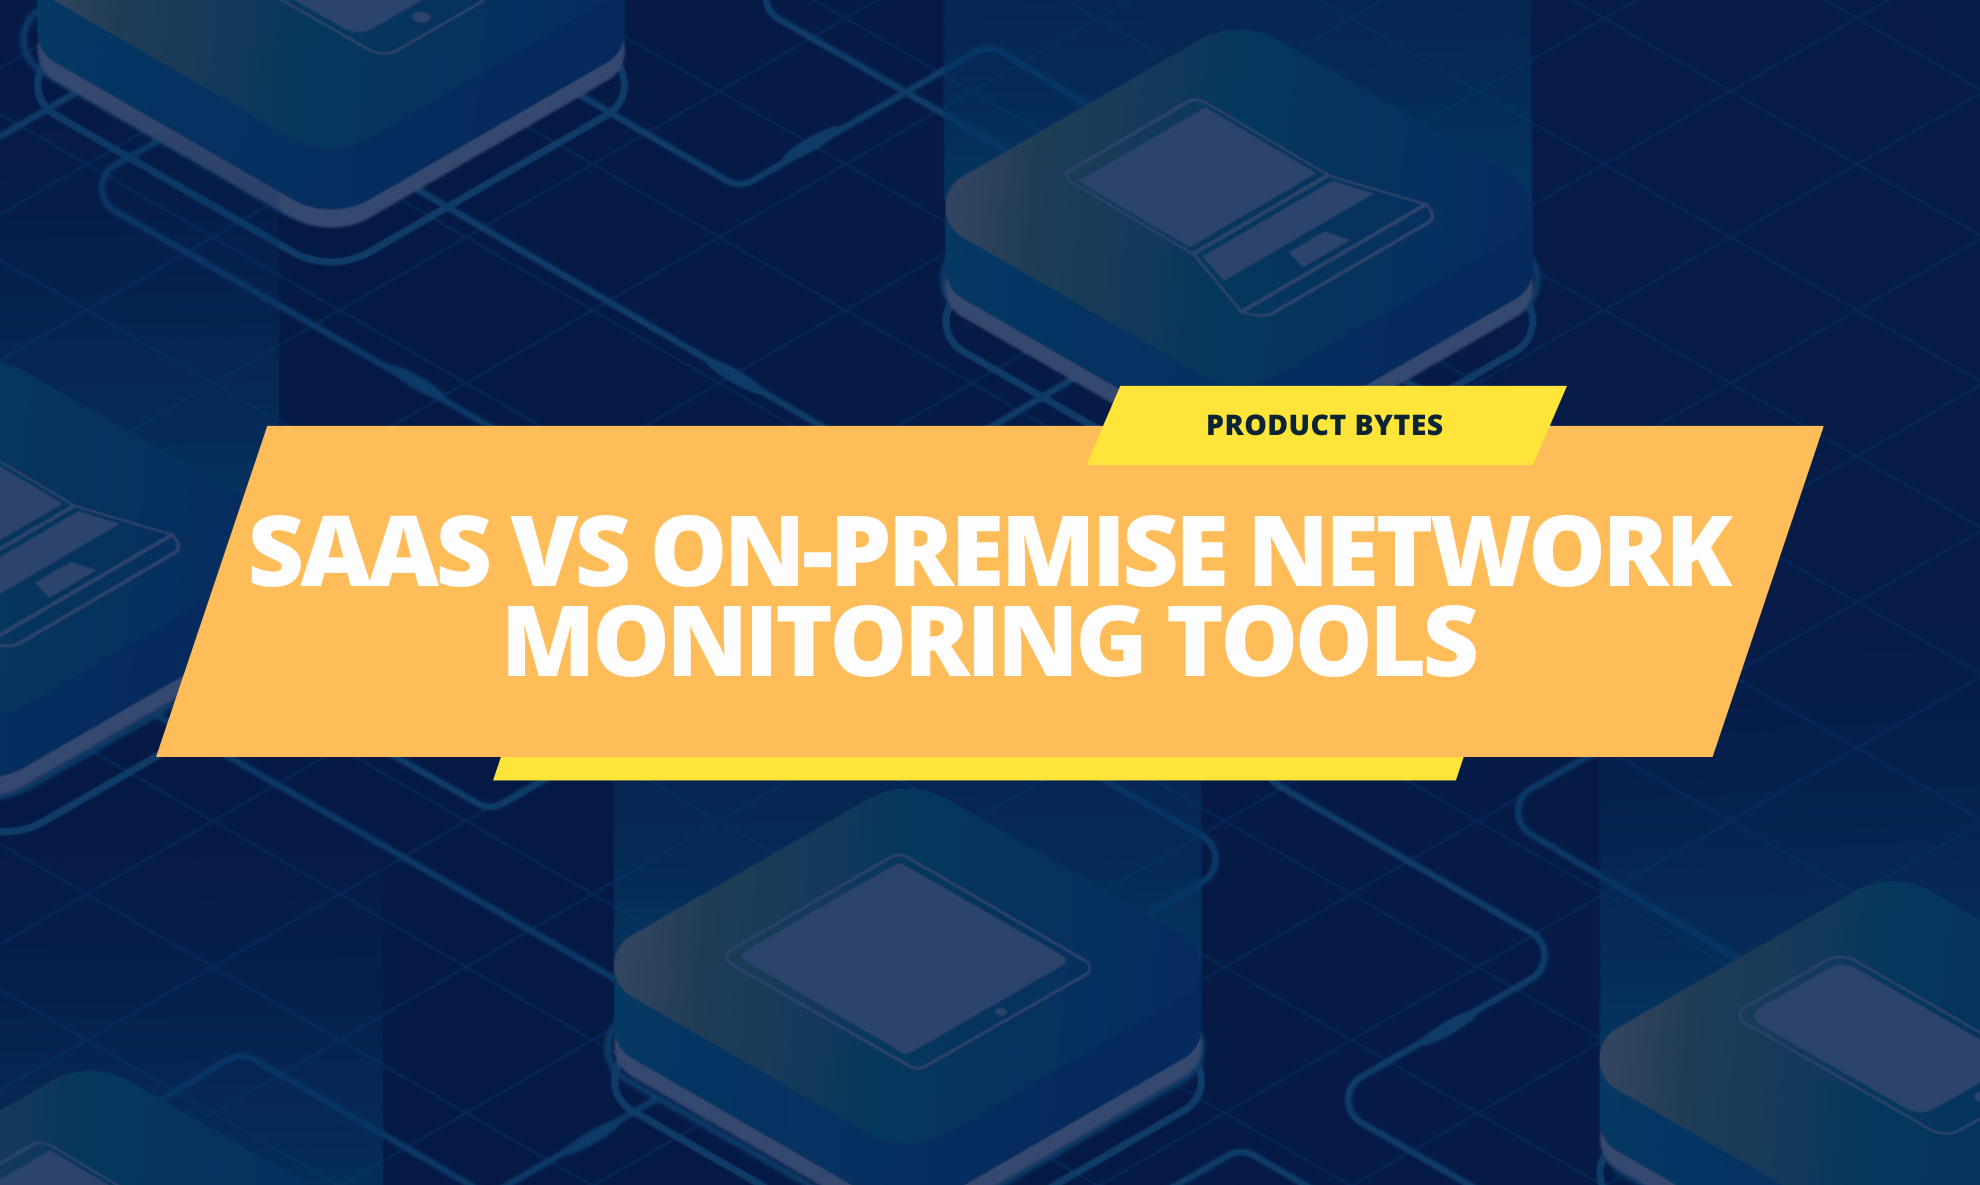 SaaS vs on-premise network monitoring tools – key differences